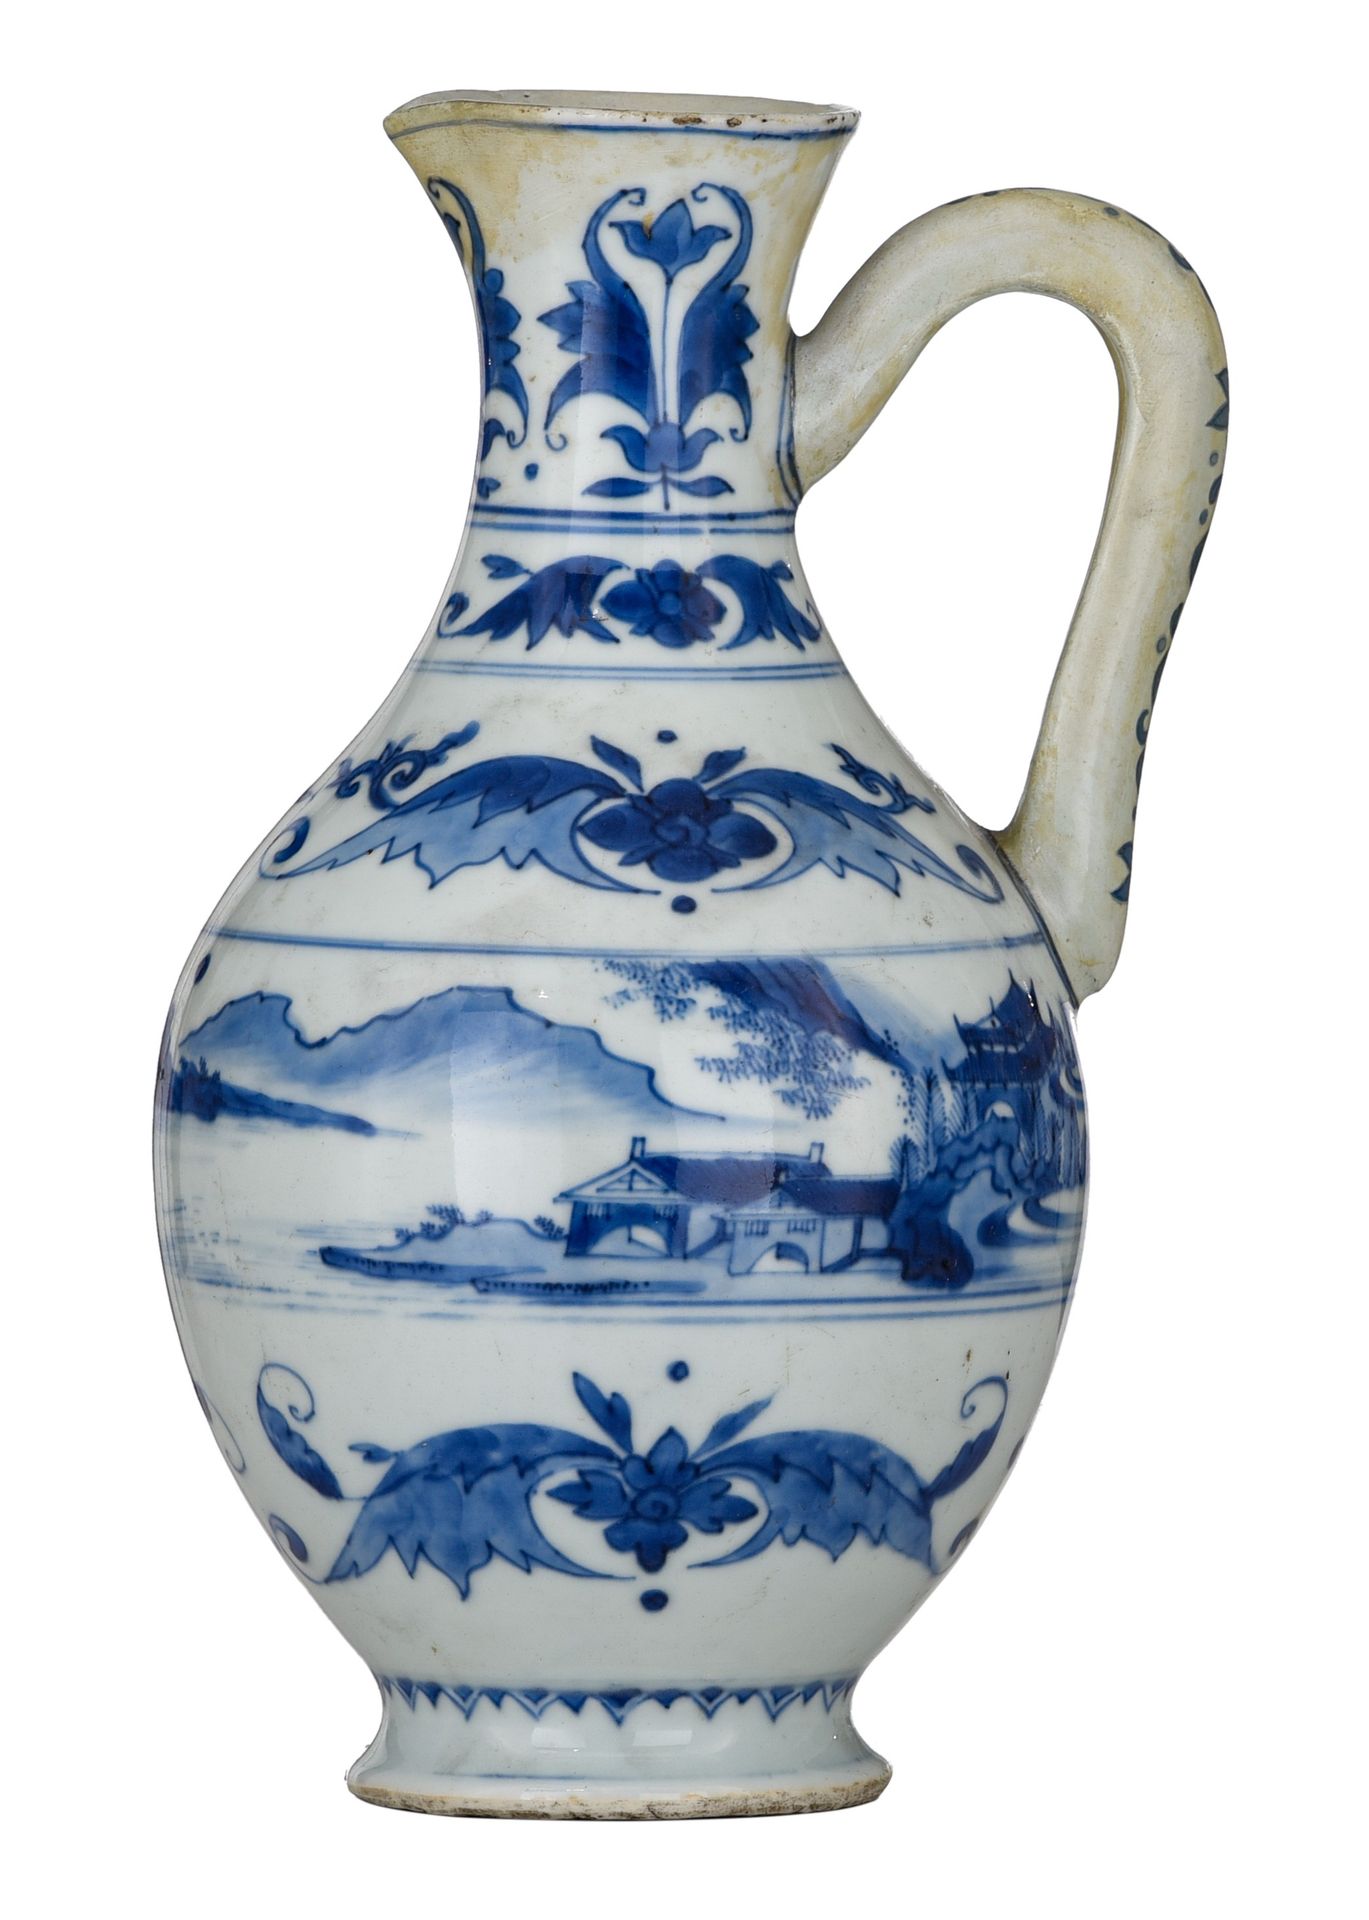 A Chinese blue and white jug, late 17thC/early 18thC, H 23,5 cm Chinesischer bla&hellip;